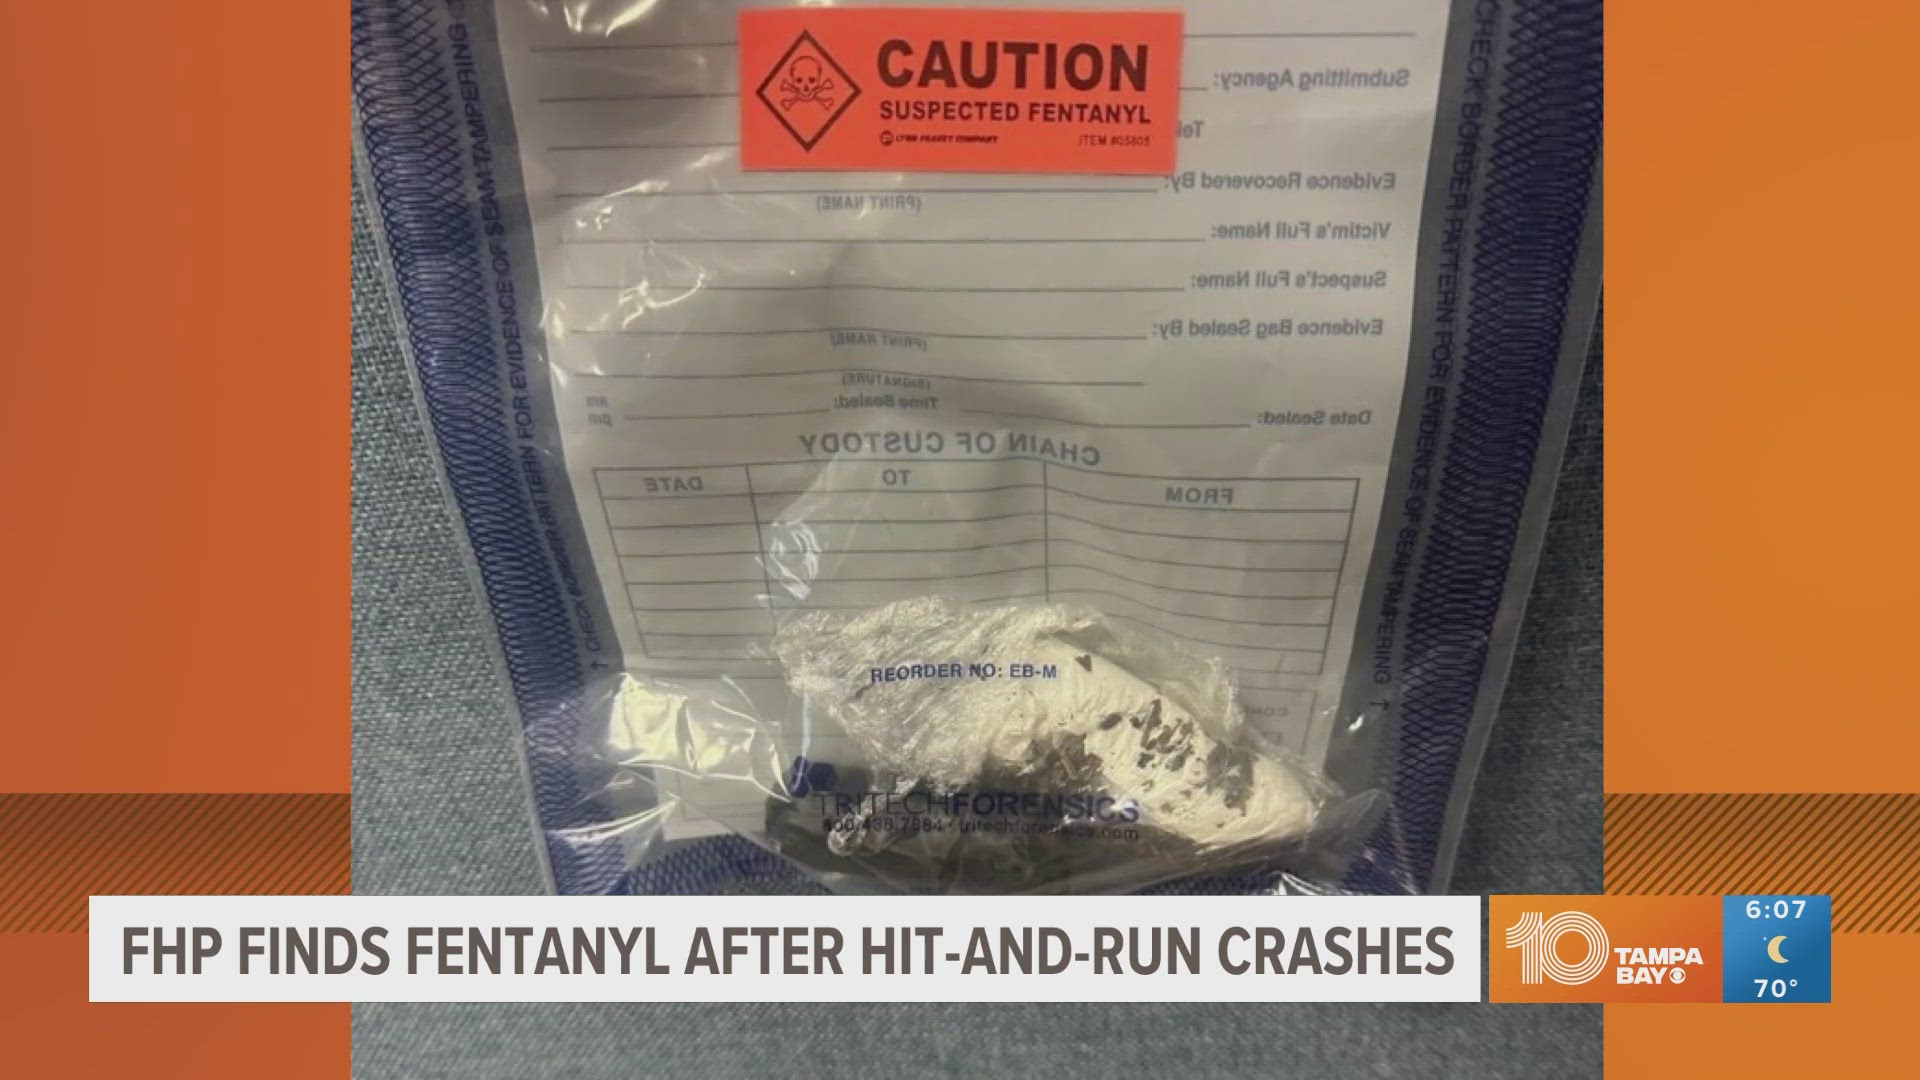 Florida Highway Patrol said troopers found just enough fentanyl to kill 30,000 people following a hit-and-run arrest.